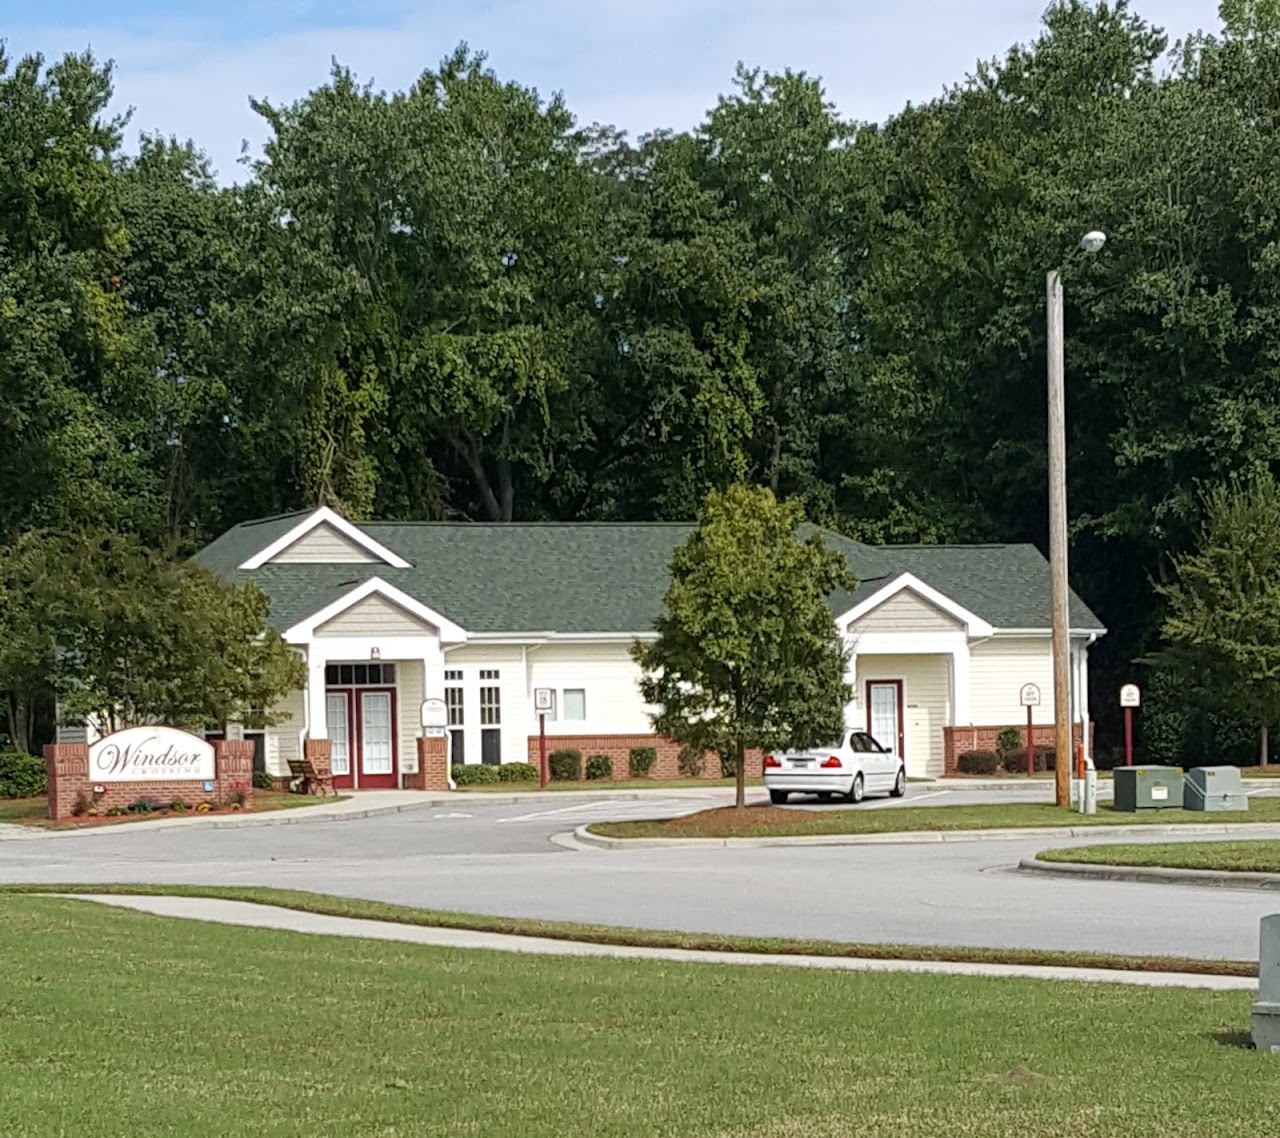 Photo of WINDSOR CROSSING APARTMENTS. Affordable housing located at 105 MEDLEY LANE LUMBERTON, NC 28358